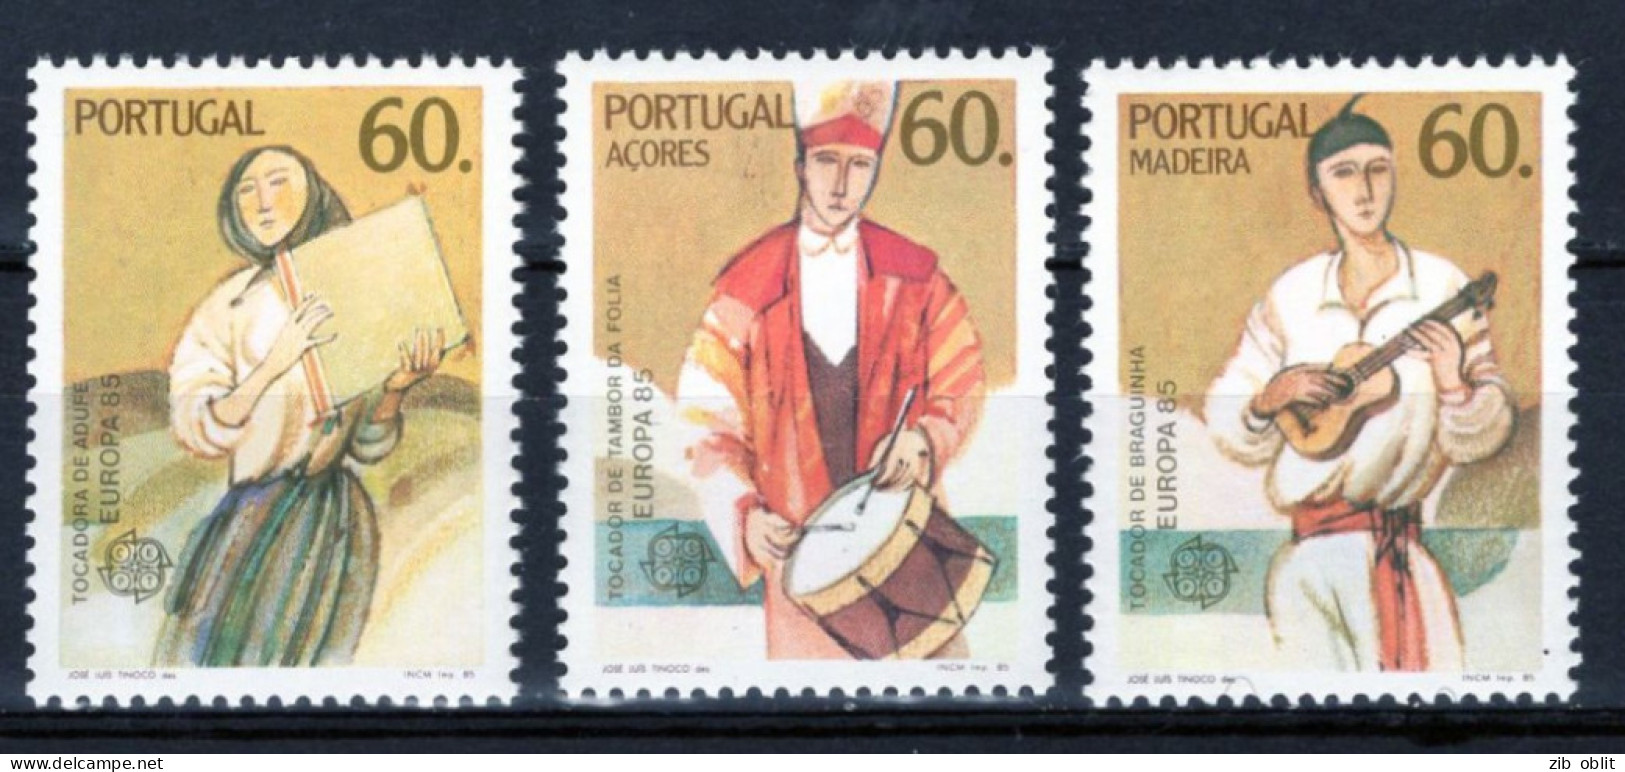 (alm10) EUROPA CEPT  Xx MNH  PORTUGAL ACORES MADERE MADEIRA Music Musique Tambour Guitare Tambourin - Musik